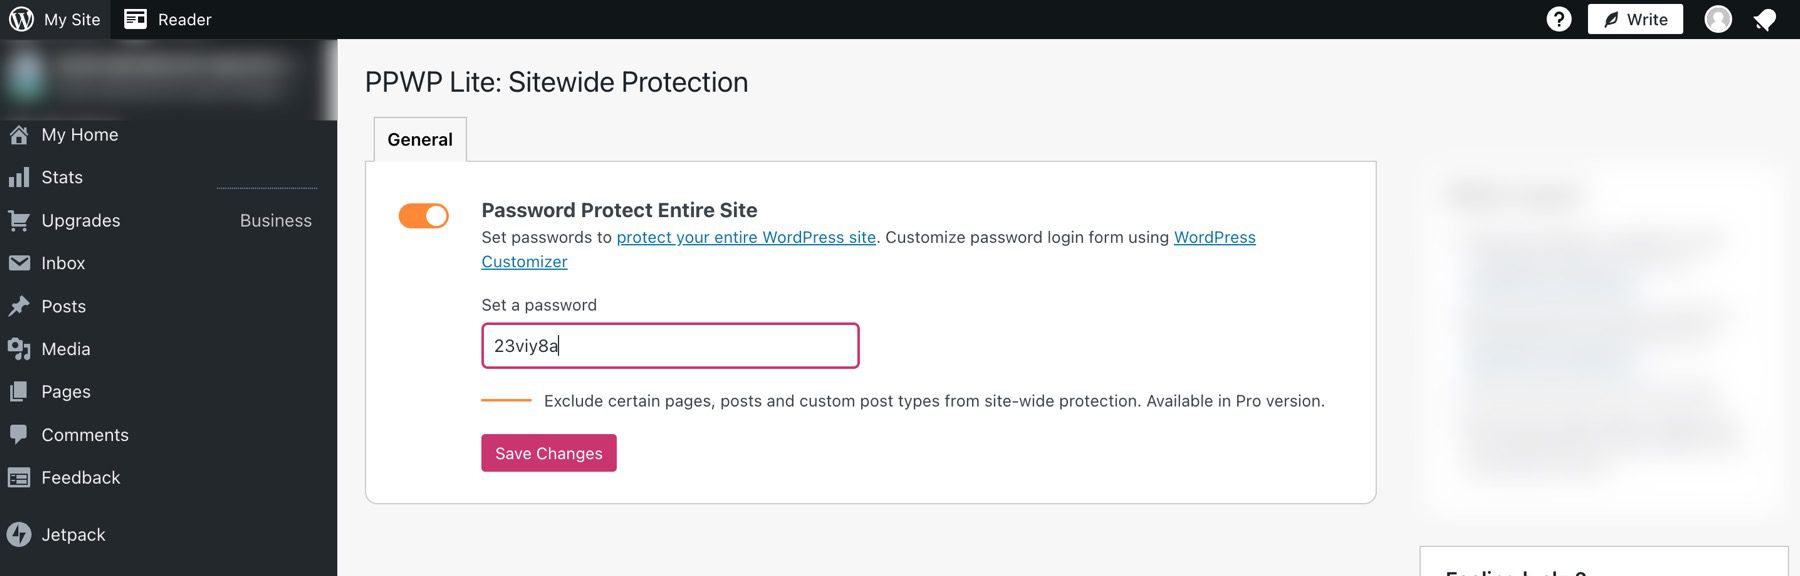 Password Protect Entire site option